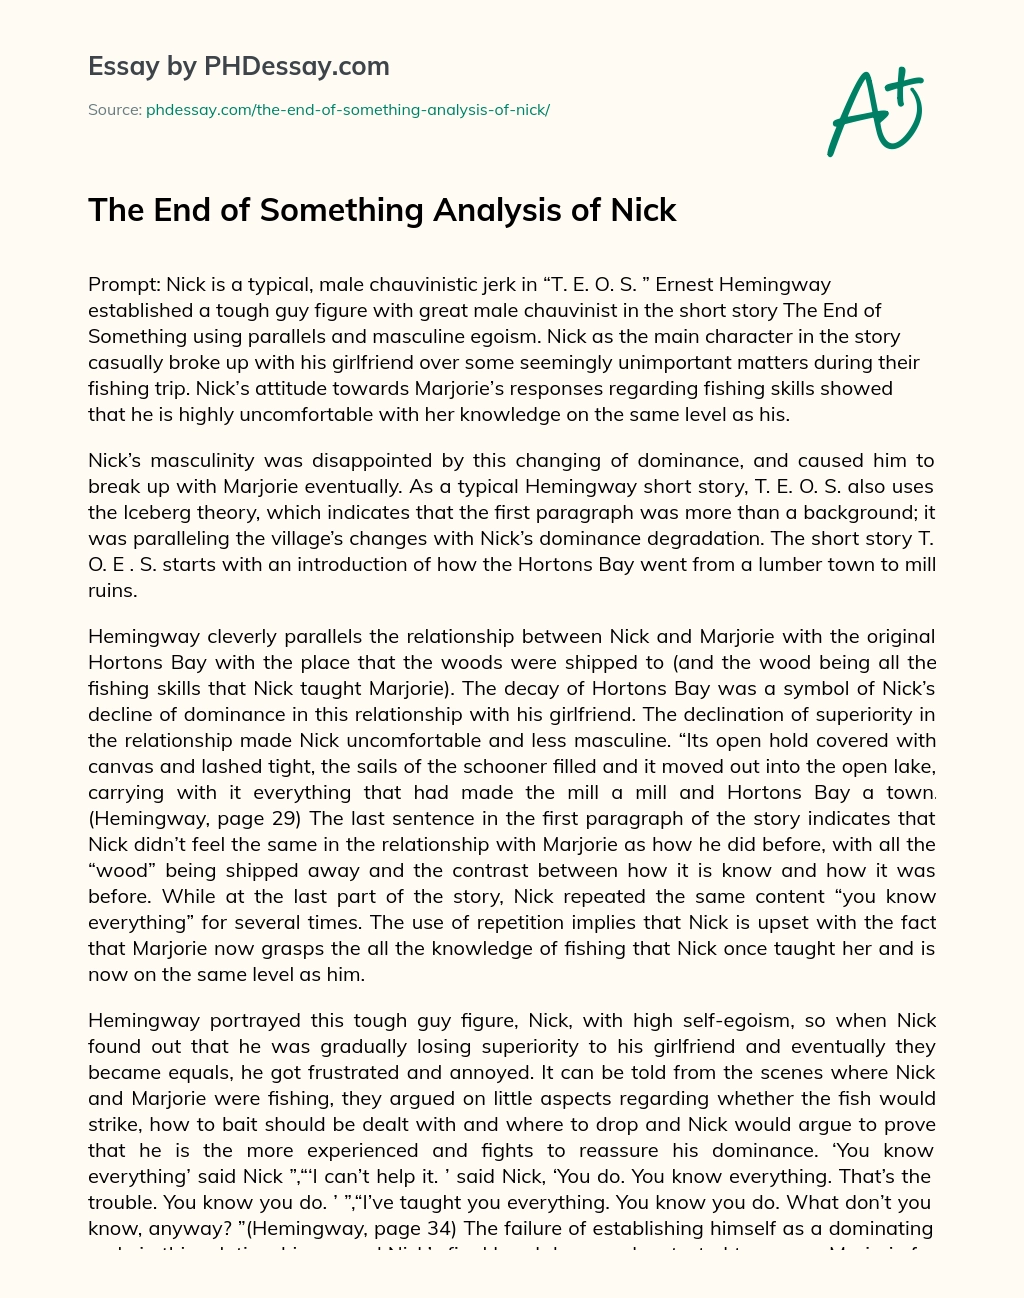 The End of Something Analysis of Nick essay